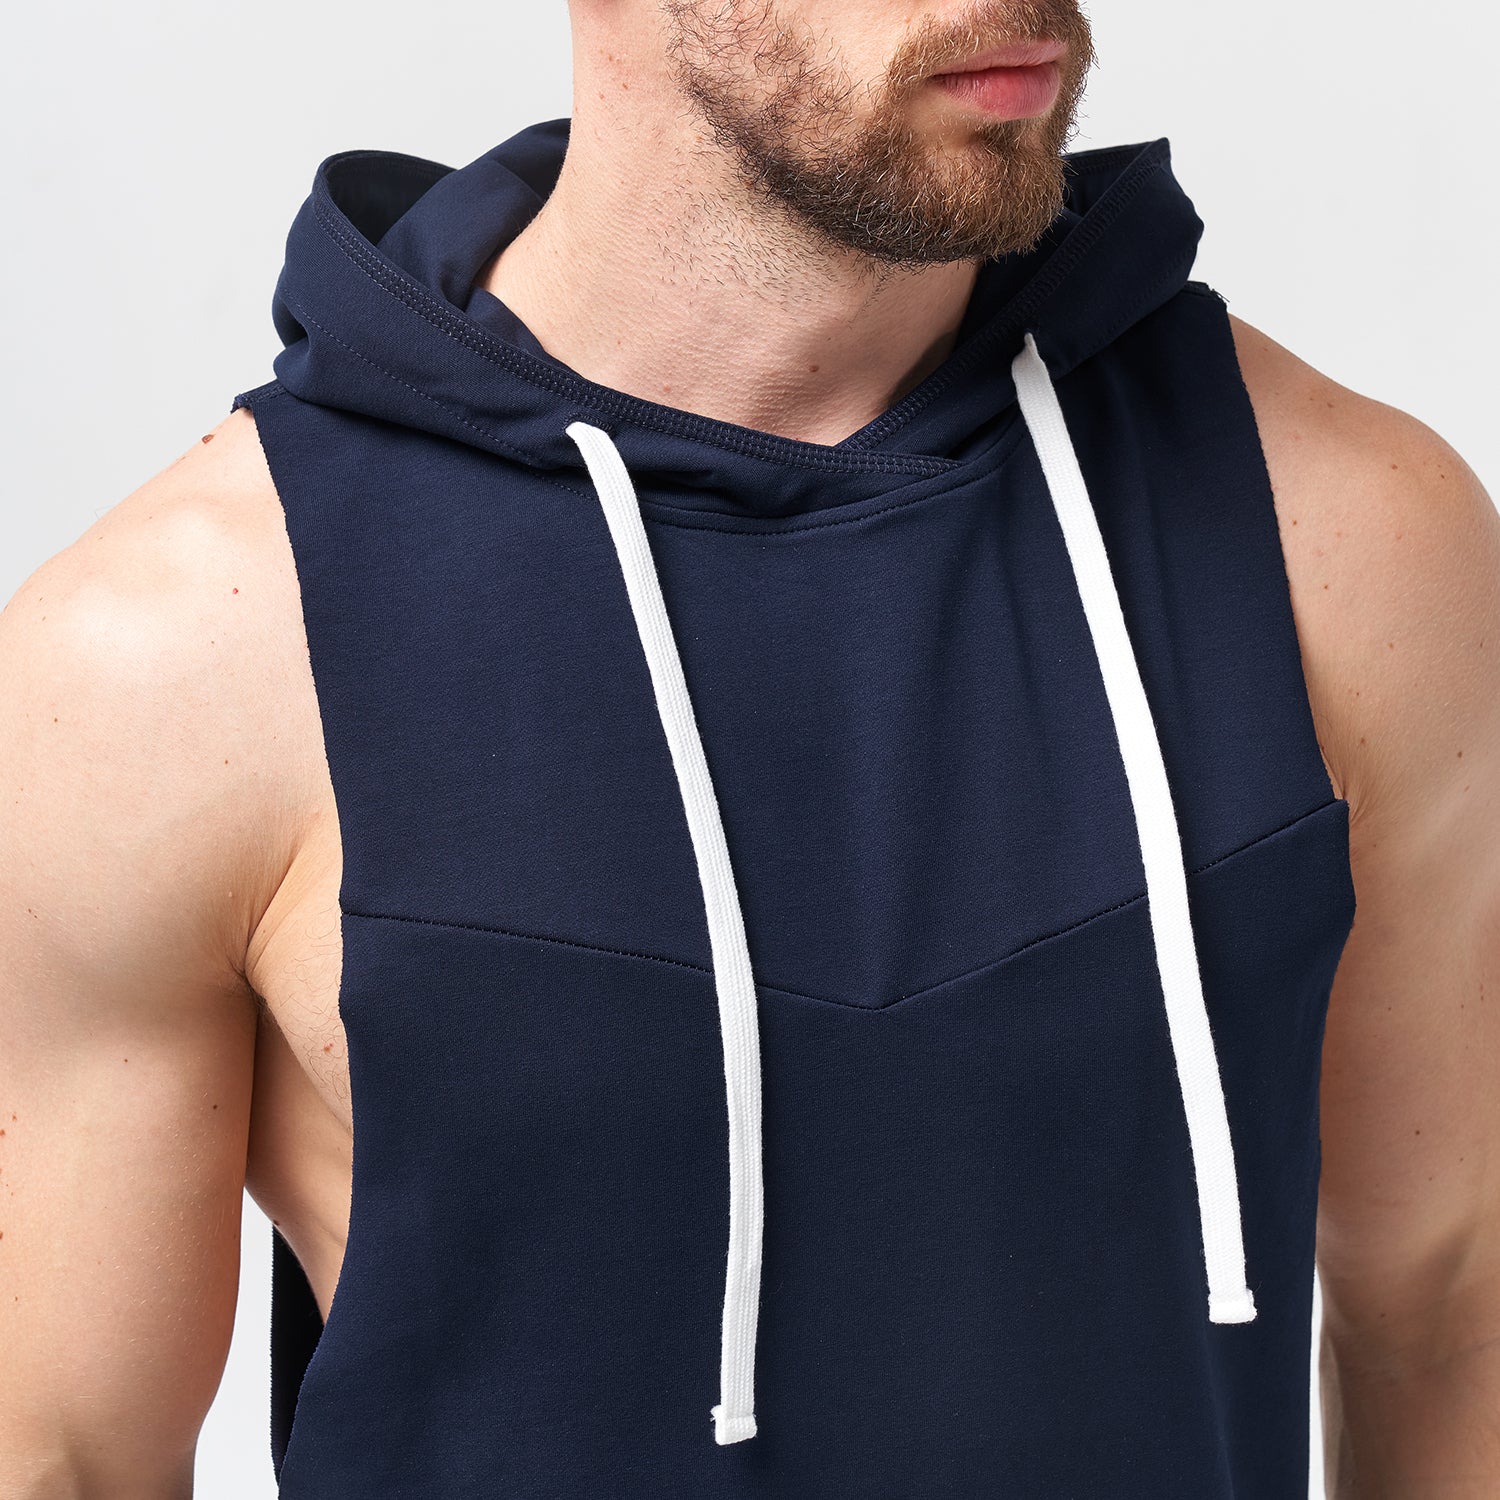 squatwolf-sleeveless-gym-hoodies-adonis-navy-workout-clothes-for-men